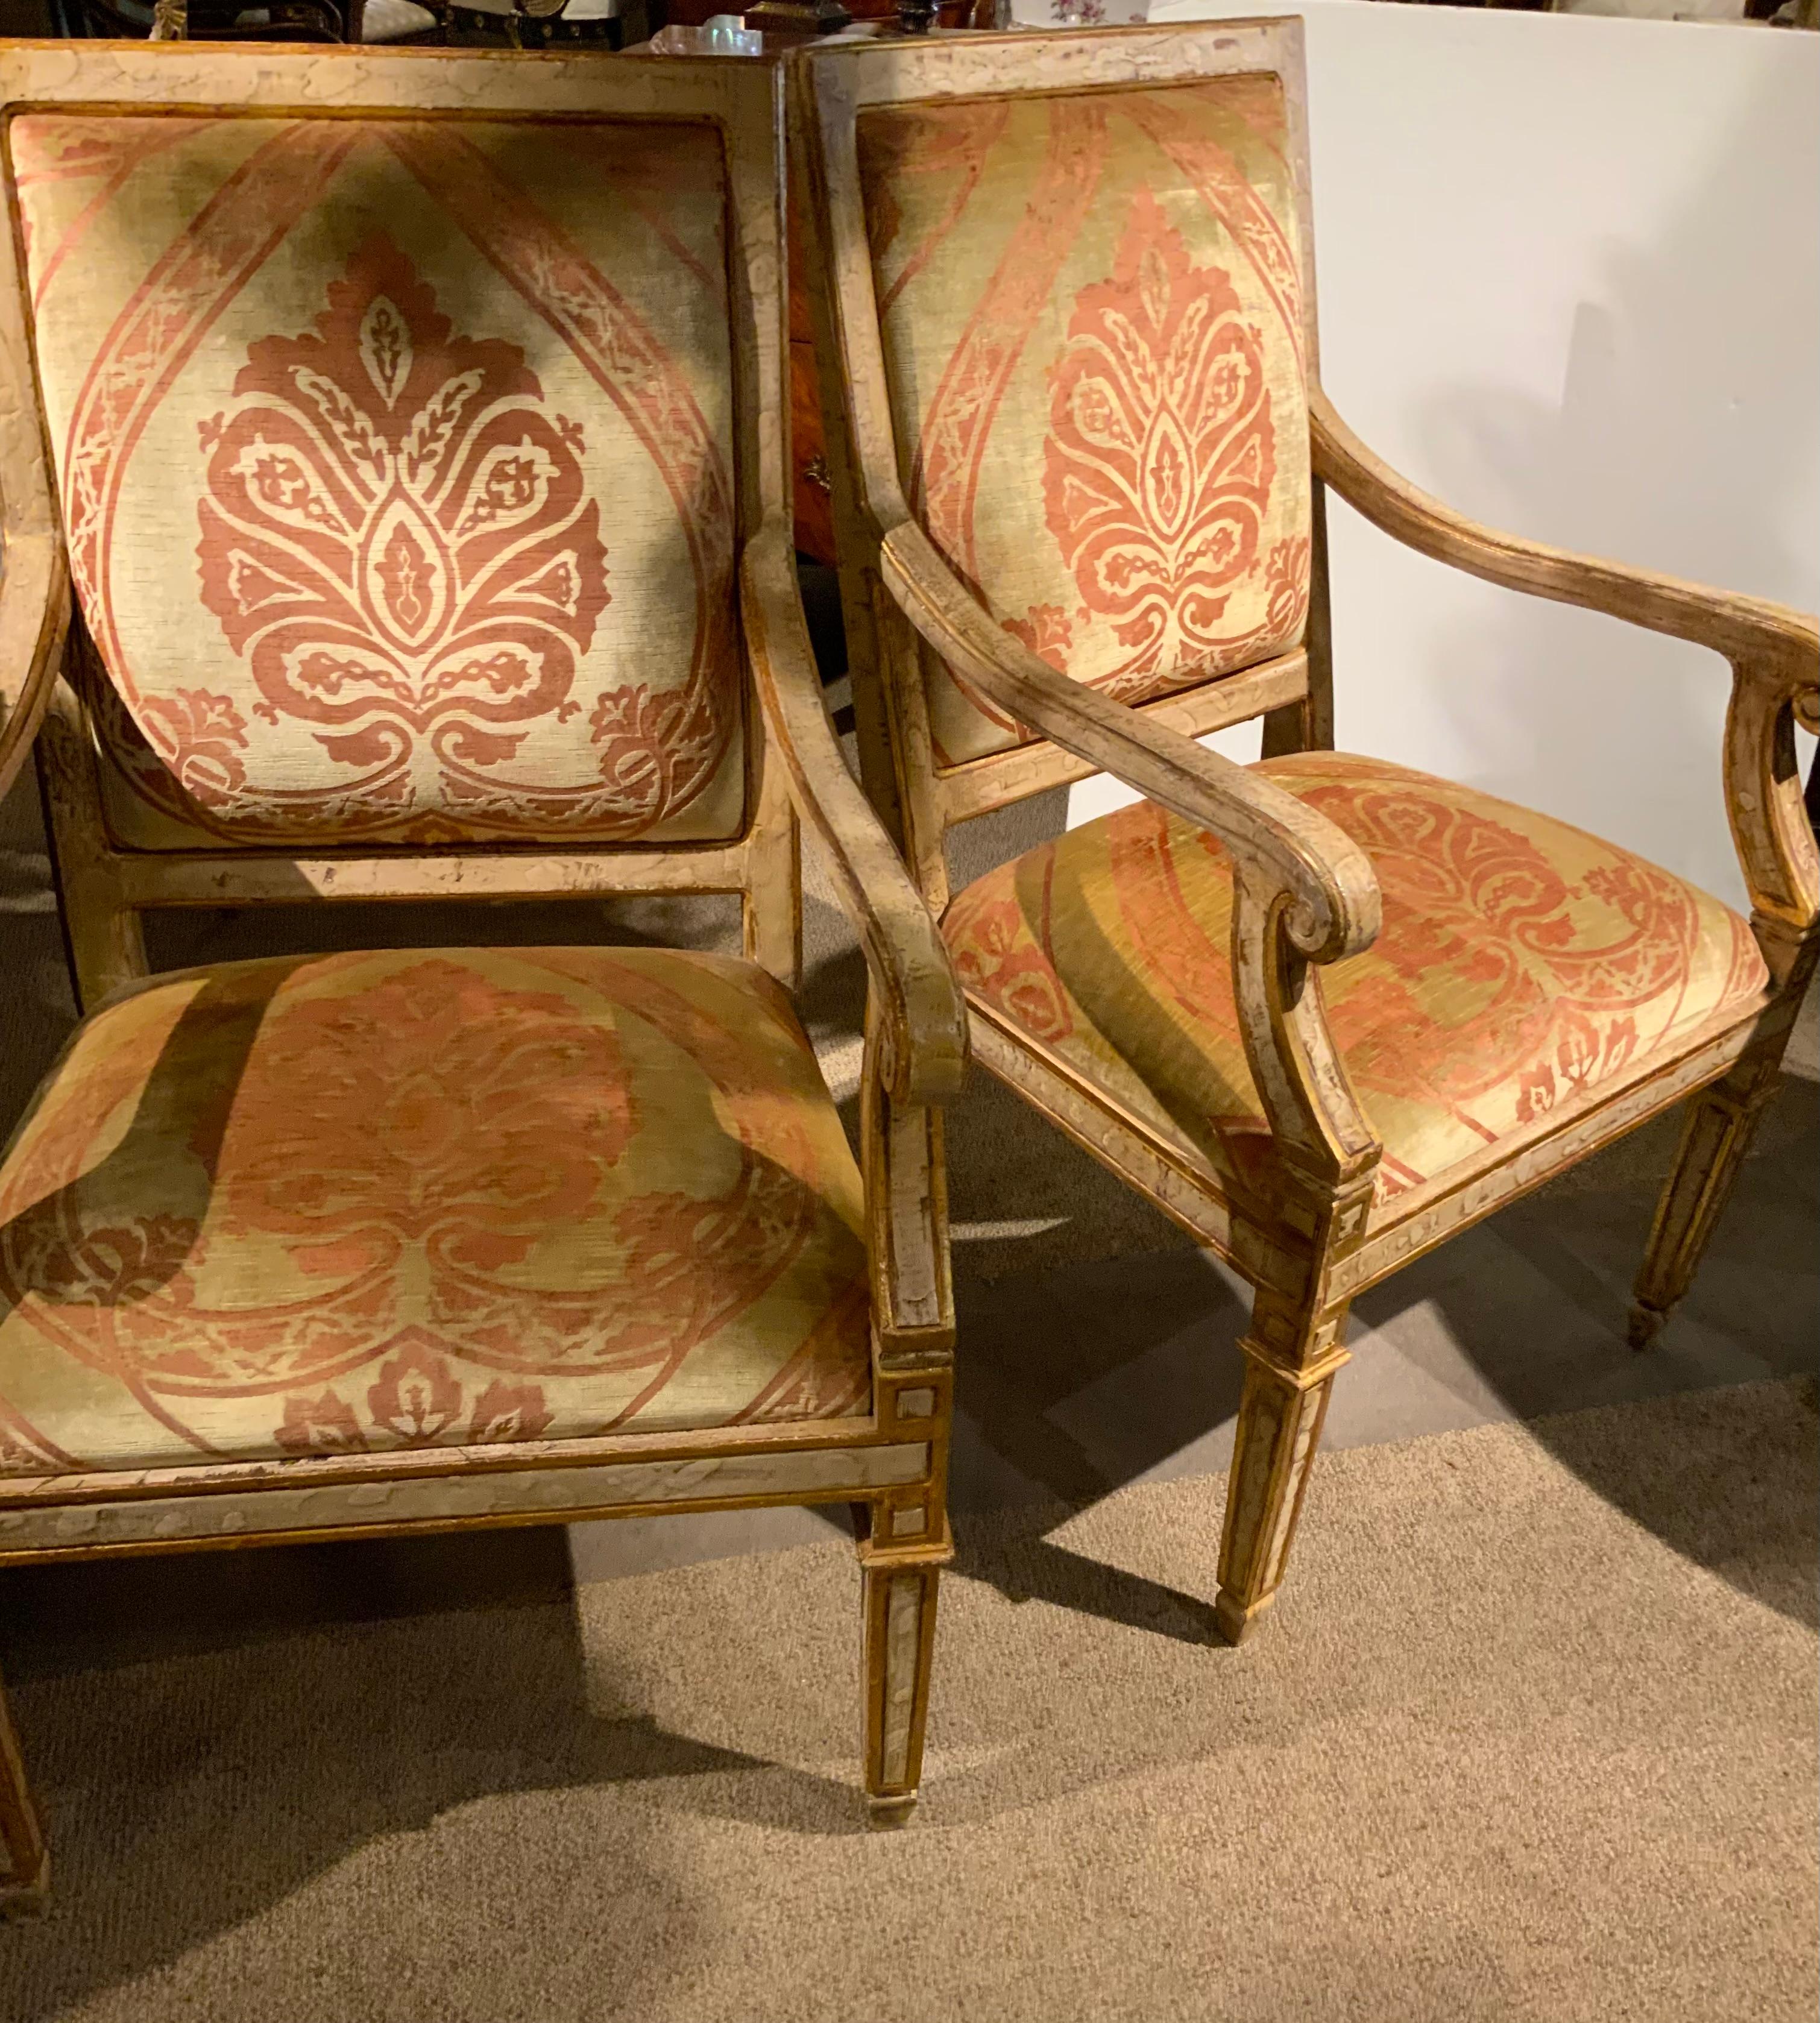 The unique painted finish with a touch of gild makes this pair
Special. The rectangular back with hand carved molding and
Inset upholstered back transitions into gracefully sloping arms
With robust scroll handles; a gentle forward sweep to a